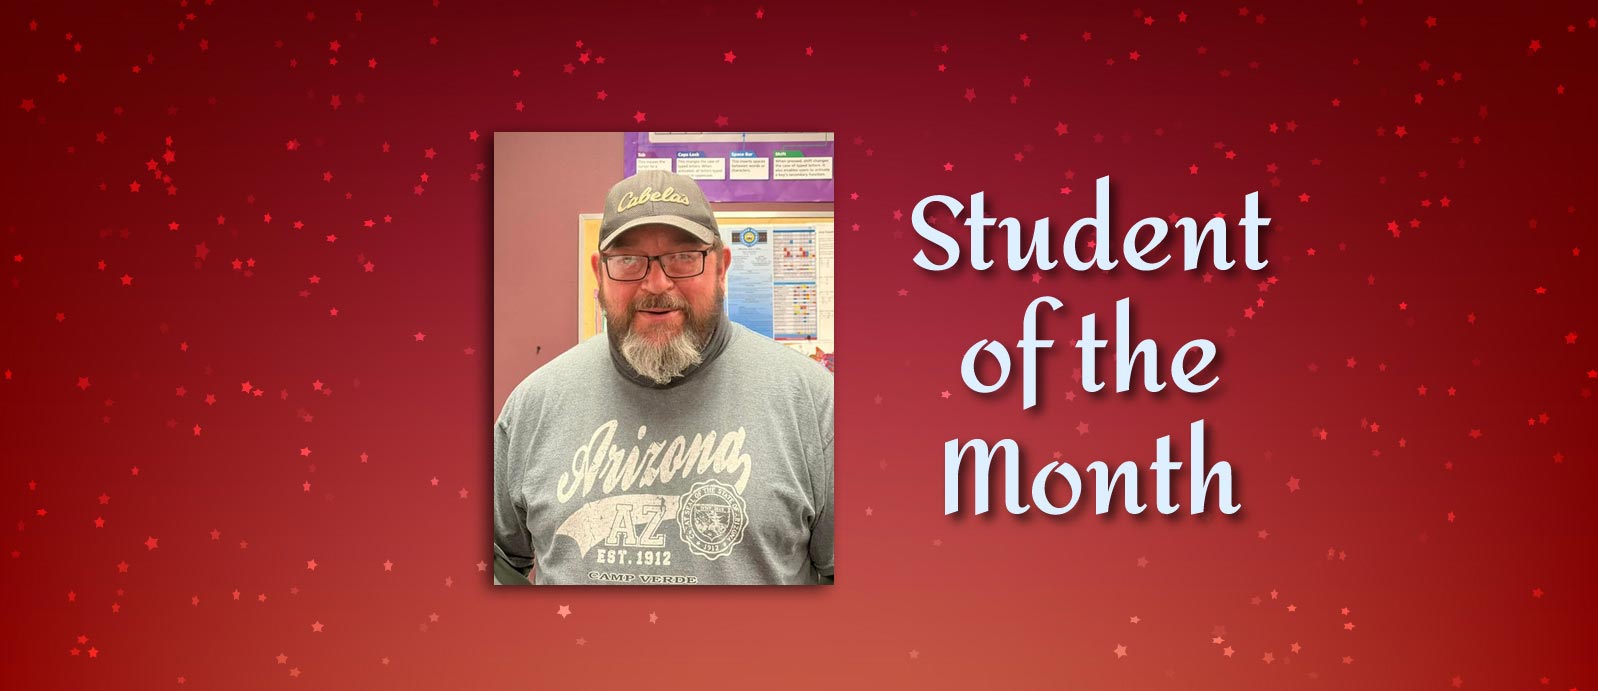 Student of the Month Christopher